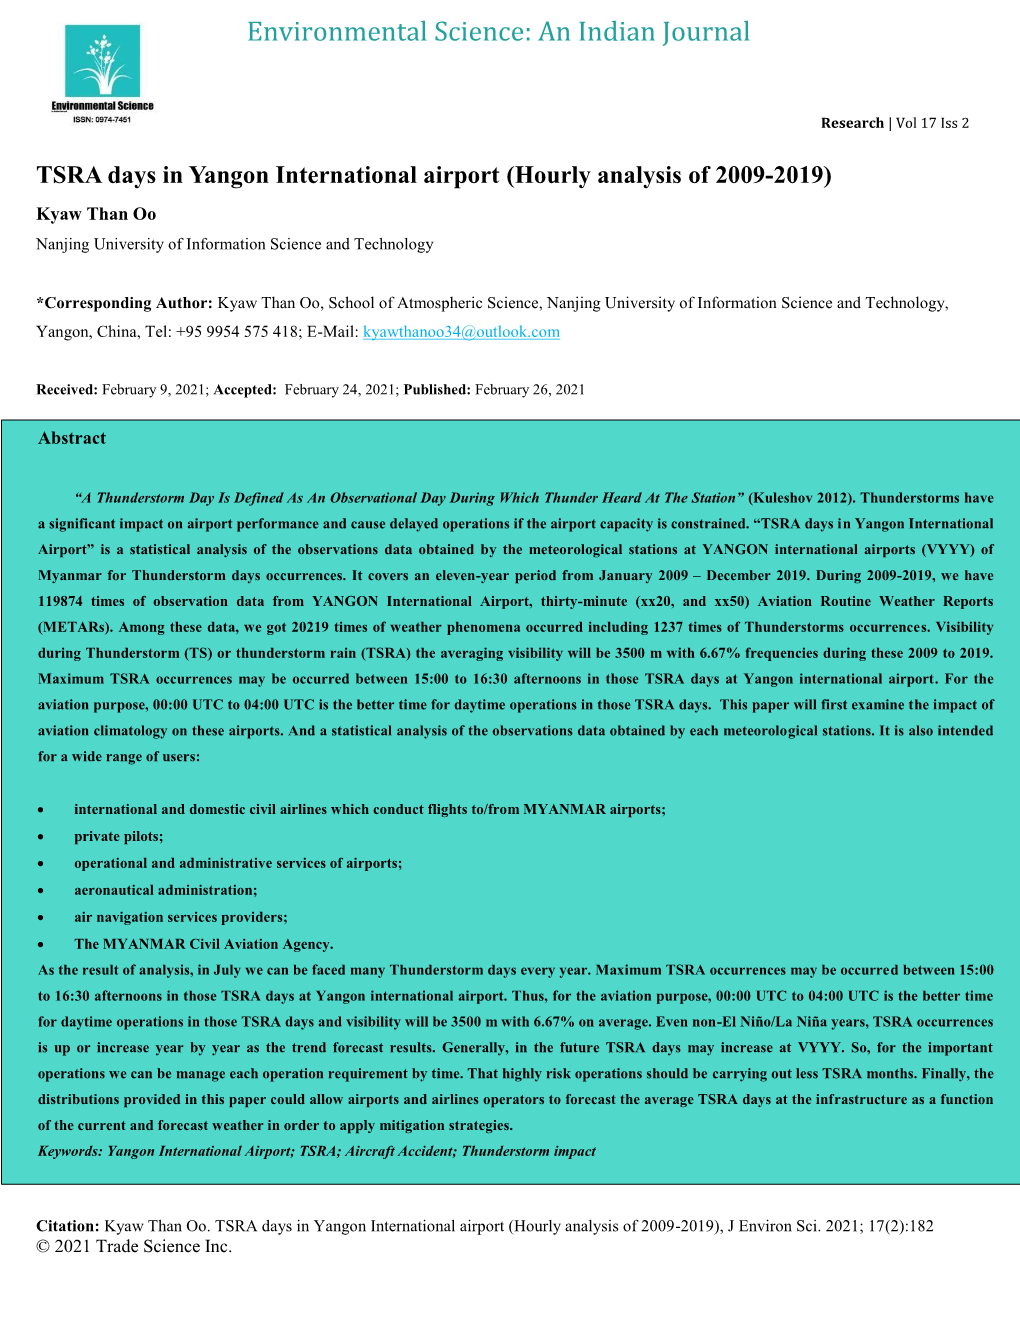 TSRA Days in Yangon International Airport (Hourly Analysis of 2009-2019) Kyaw Than Oo Nanjing University of Information Science and Technology